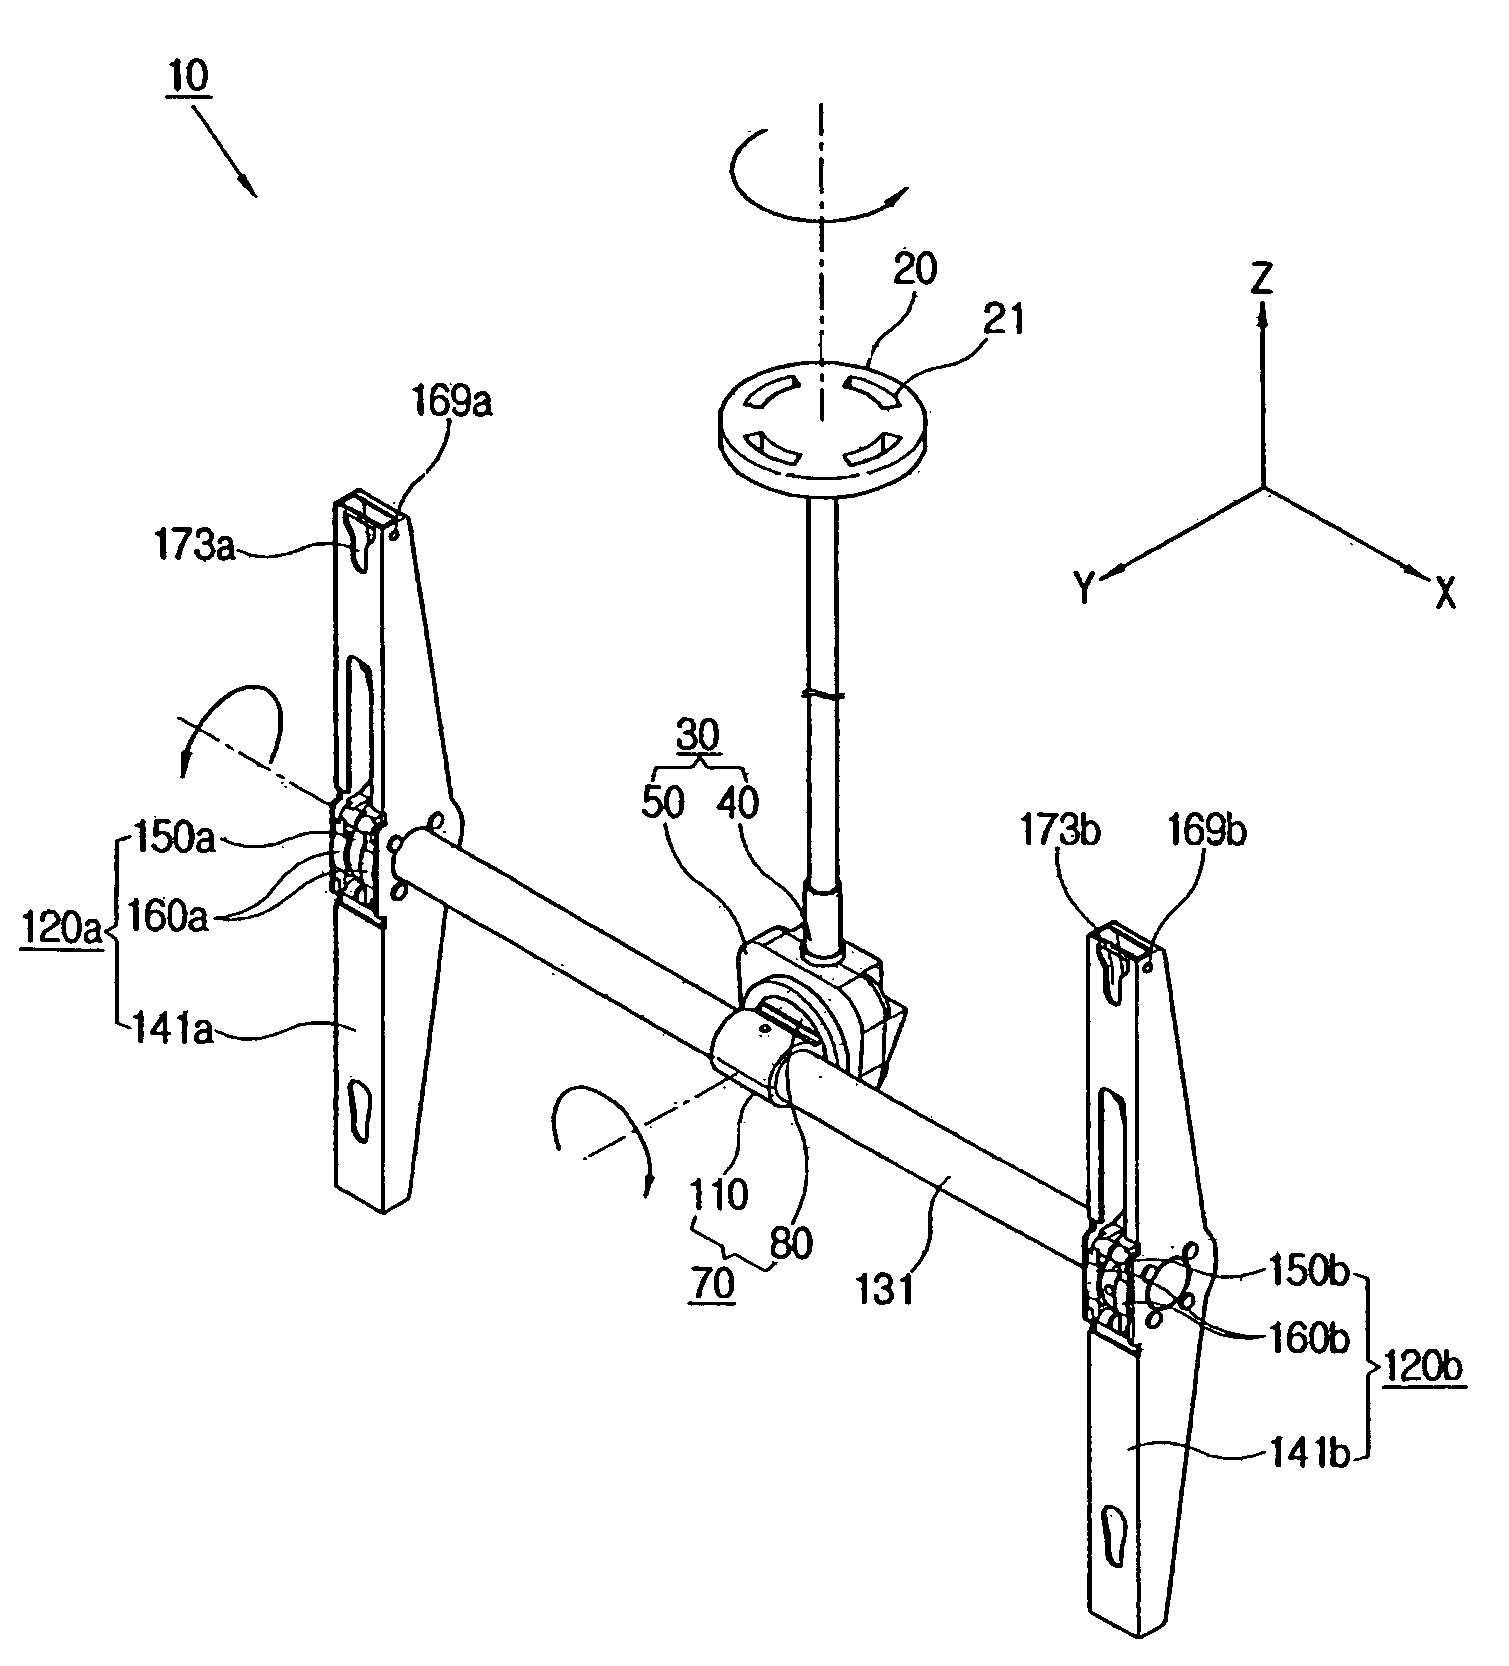 Apparatus to support a display device